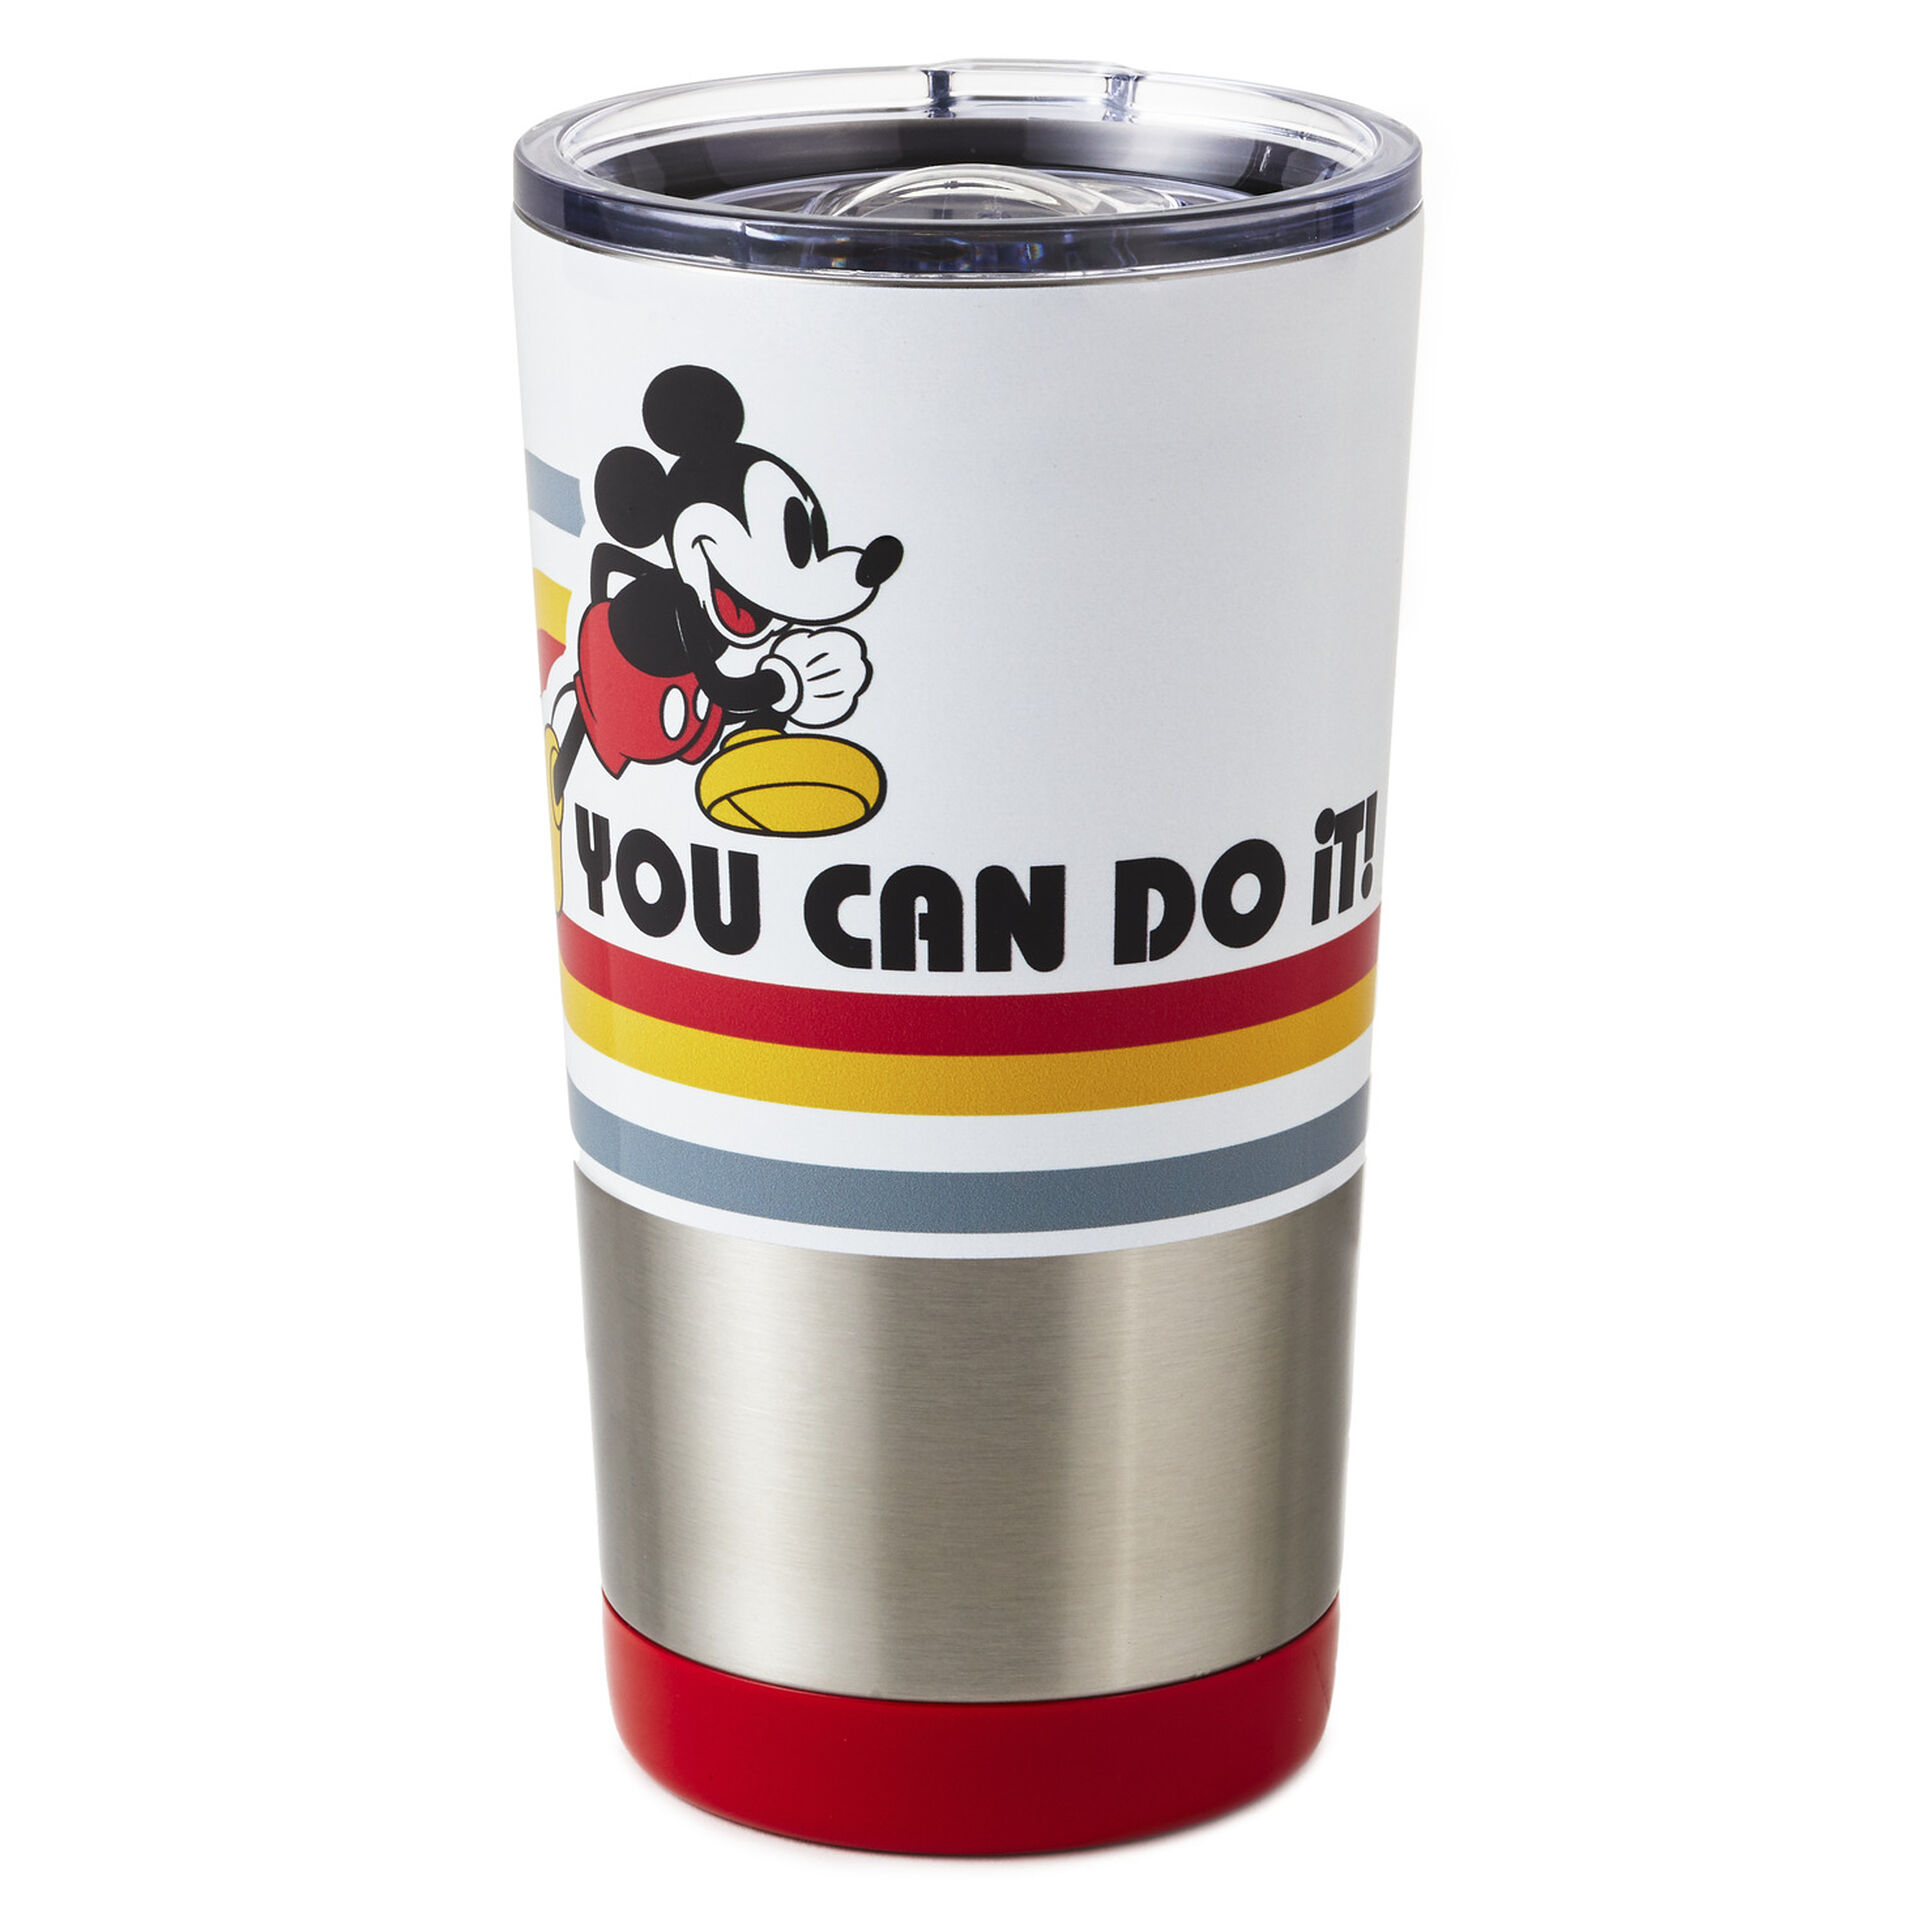 Disney-Mickey-Mouse-Stainless-Steel-Travel-Mug-With-Lid_1DYG2022_01-1.jpg